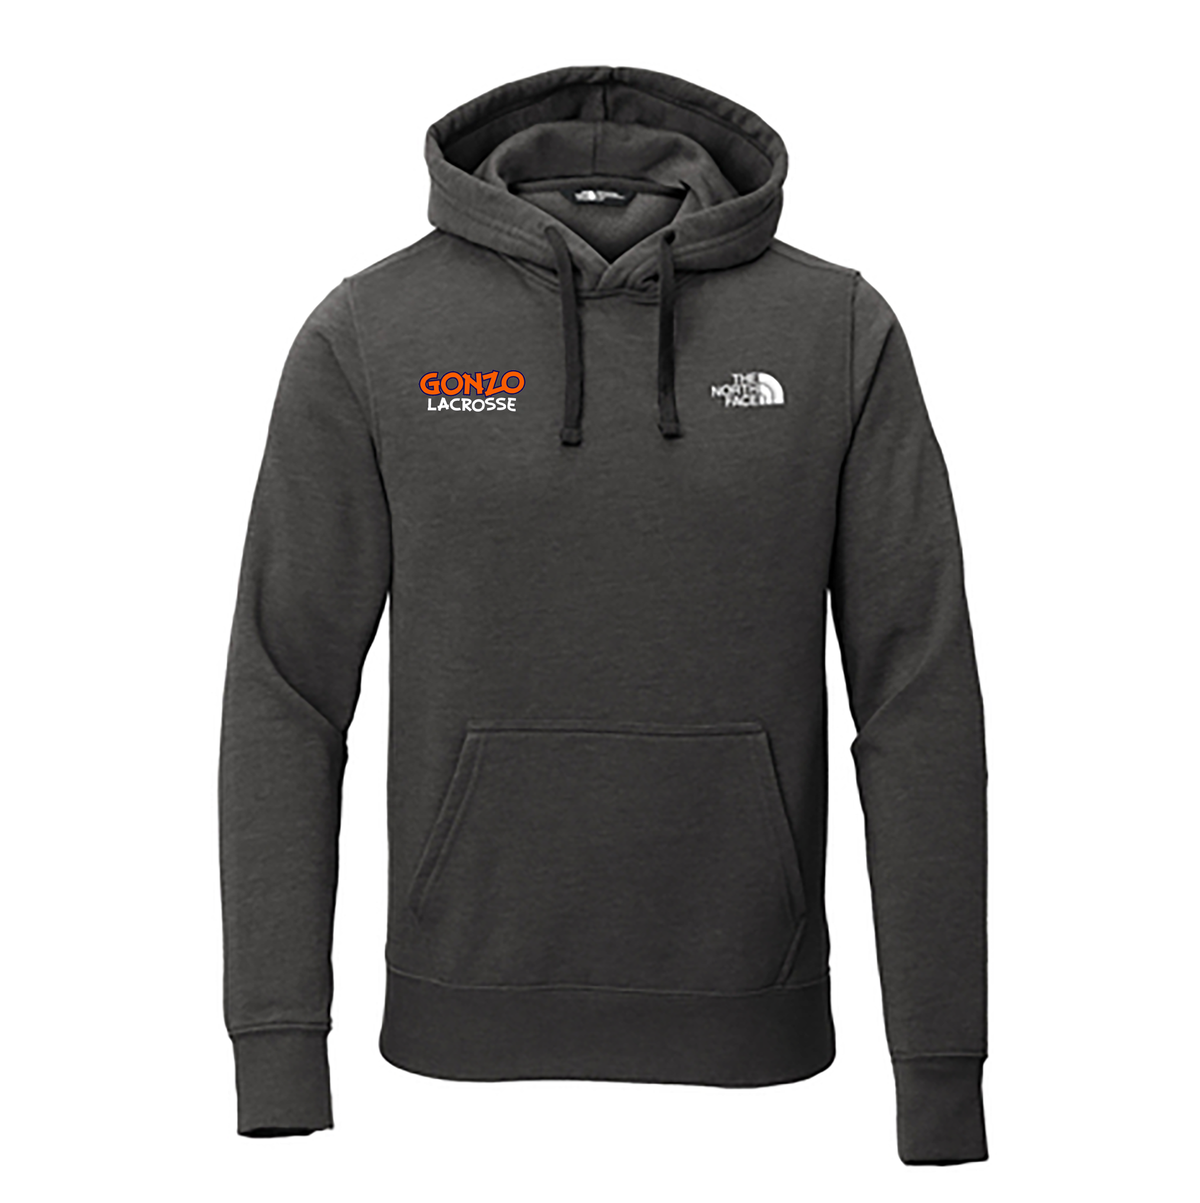 Gonzo Lacrosse The North Face Pullover Hoodie